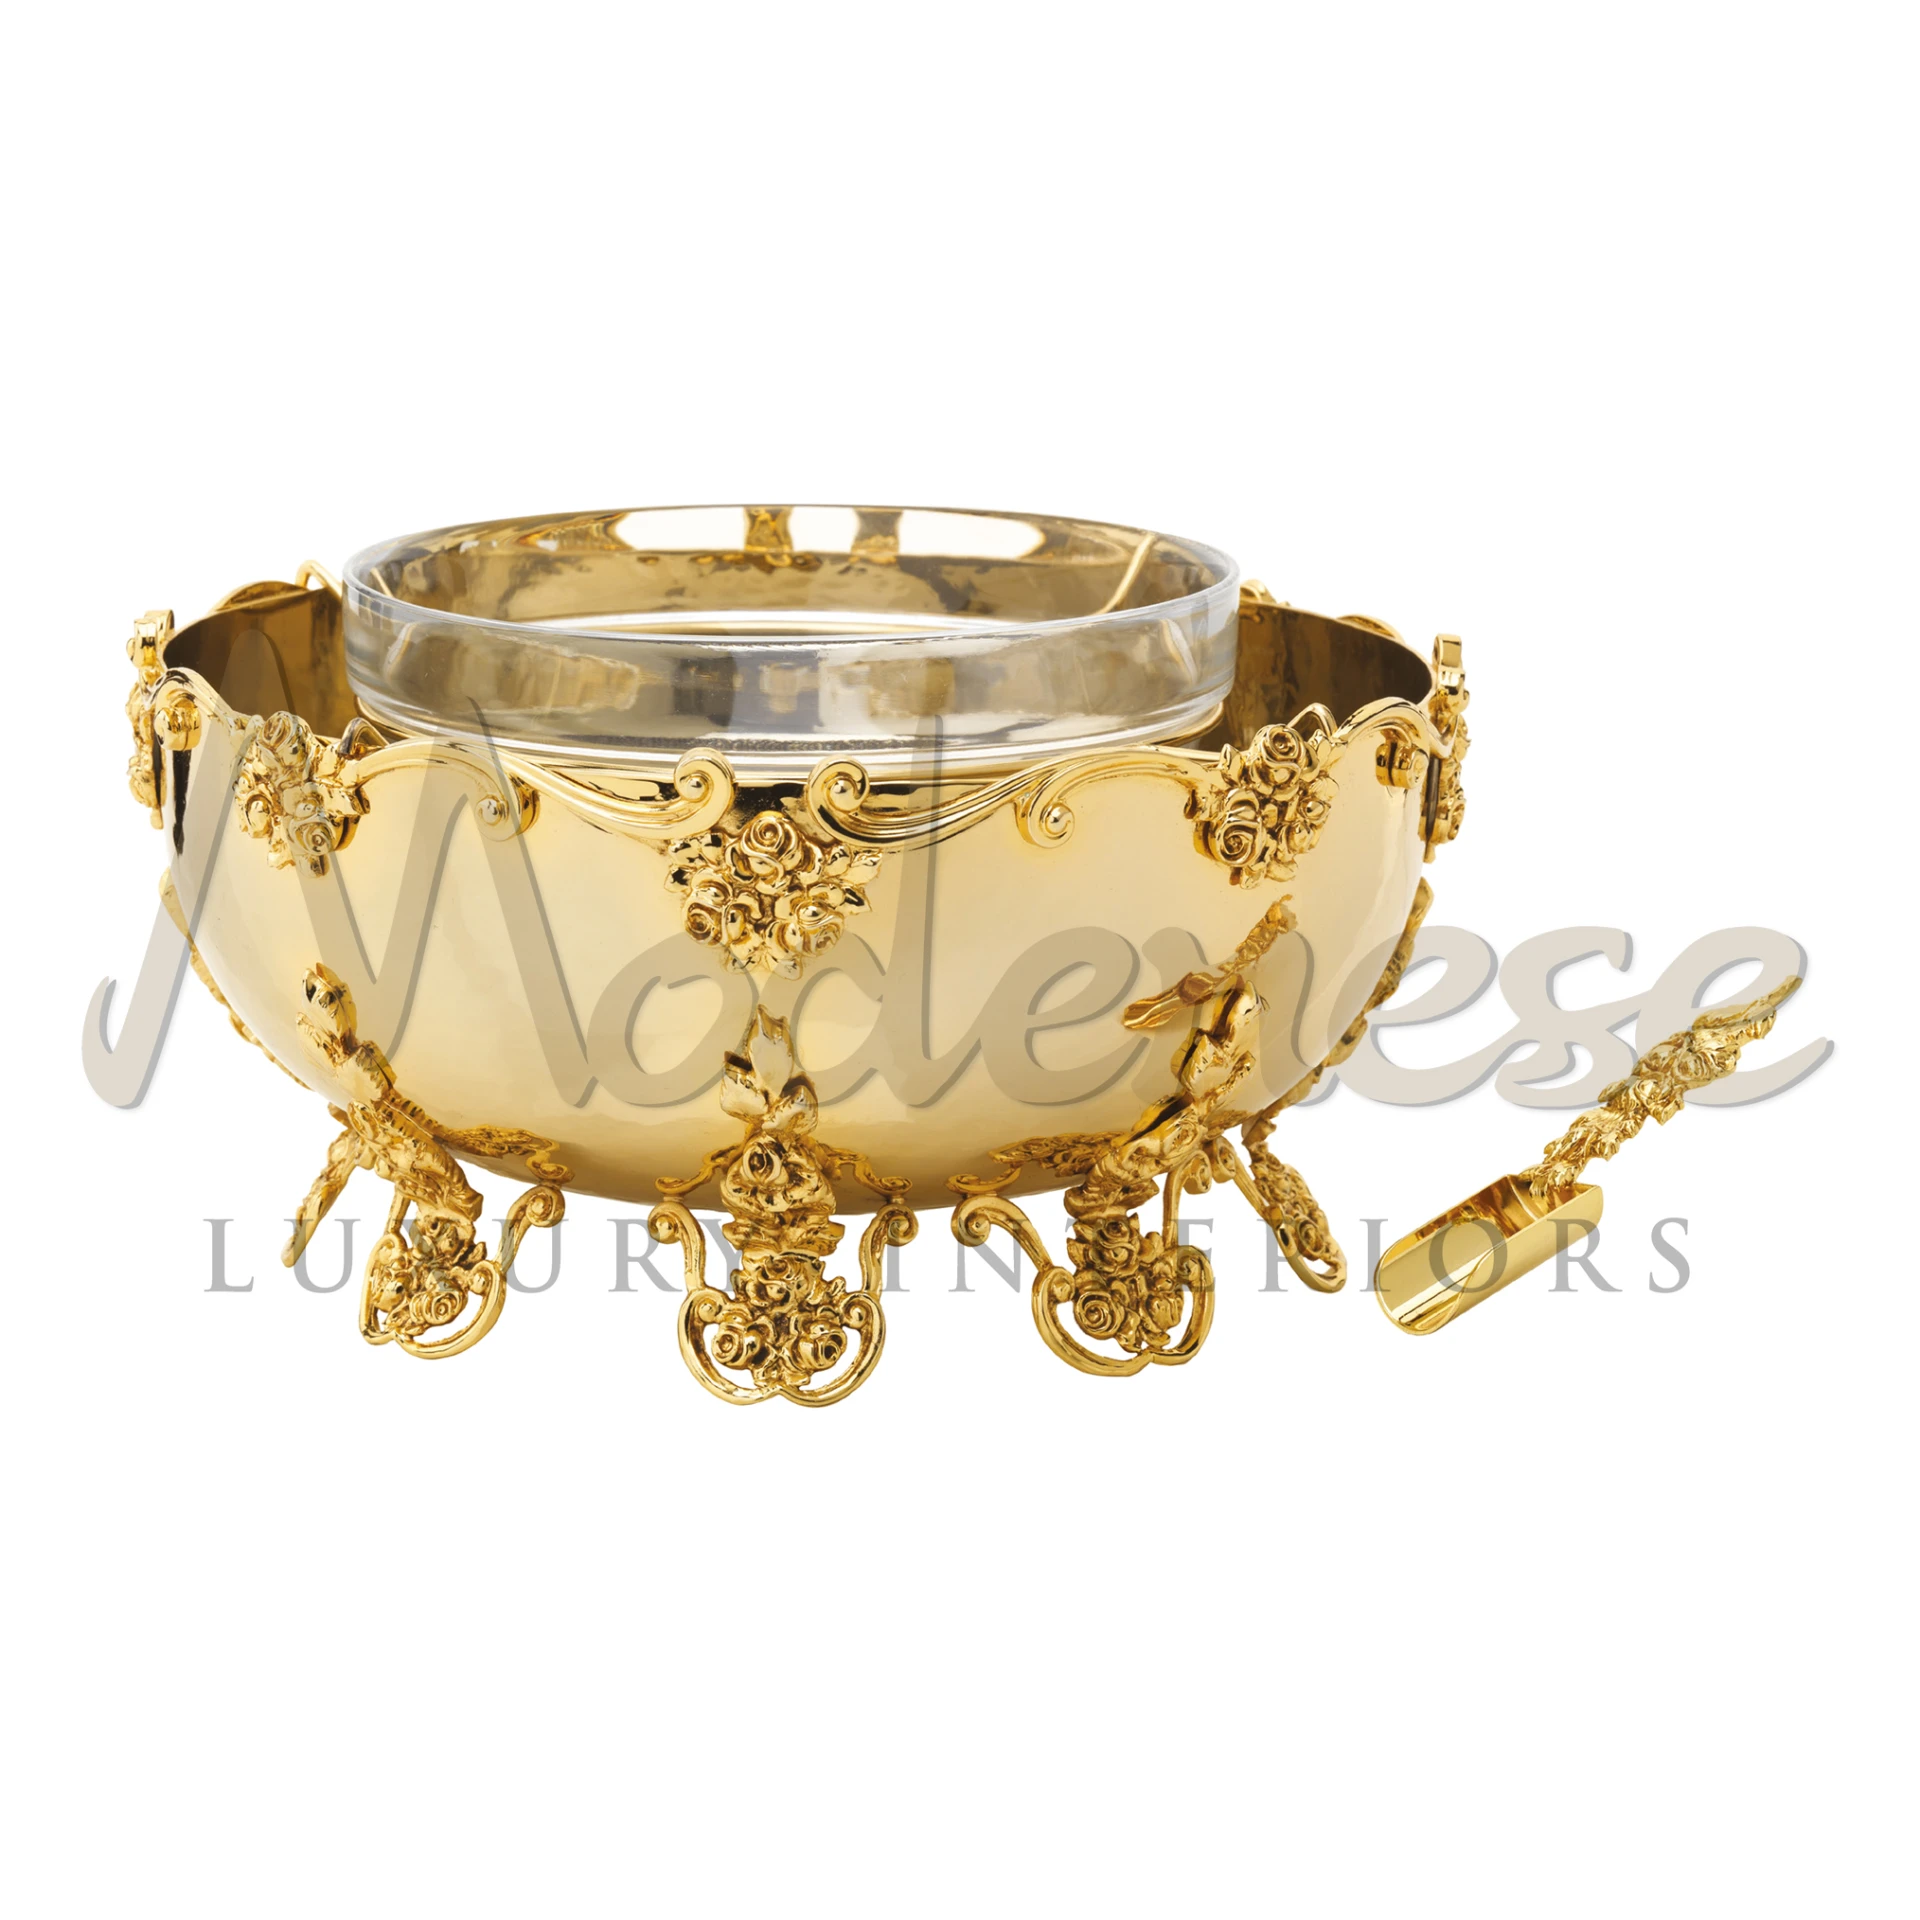 A gold-plated metal caviar server with a crystal glass bowl and a spoon.